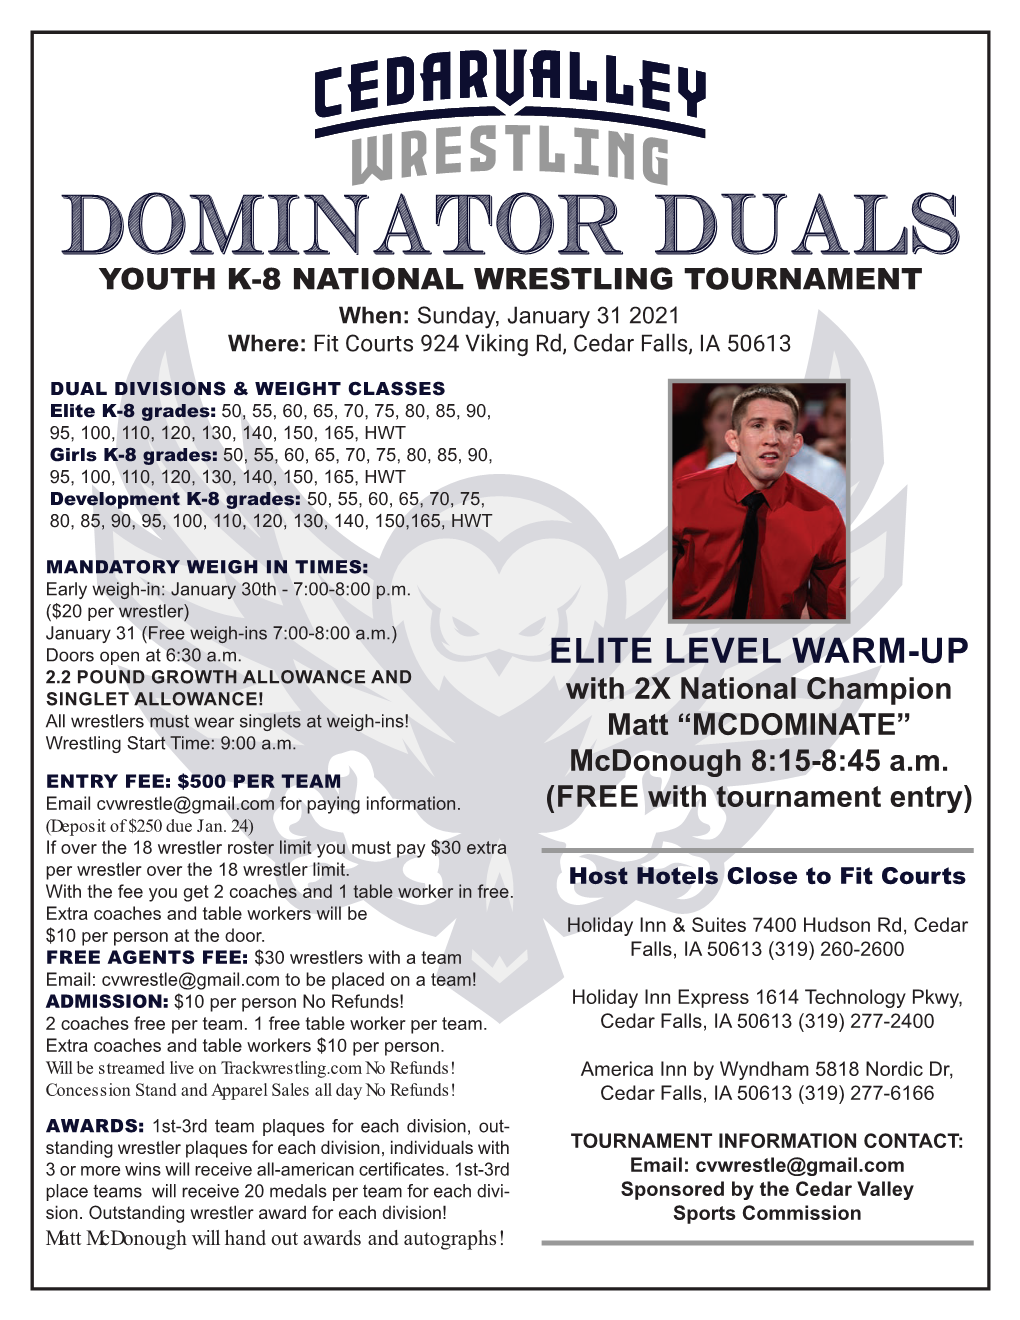 DOMINATOR DUALS YOUTH K-8 NATIONAL WRESTLING TOURNAMENT When: Sunday, January 31 2021 Where: Fit Courts 924 Viking Rd, Cedar Falls, IA 50613